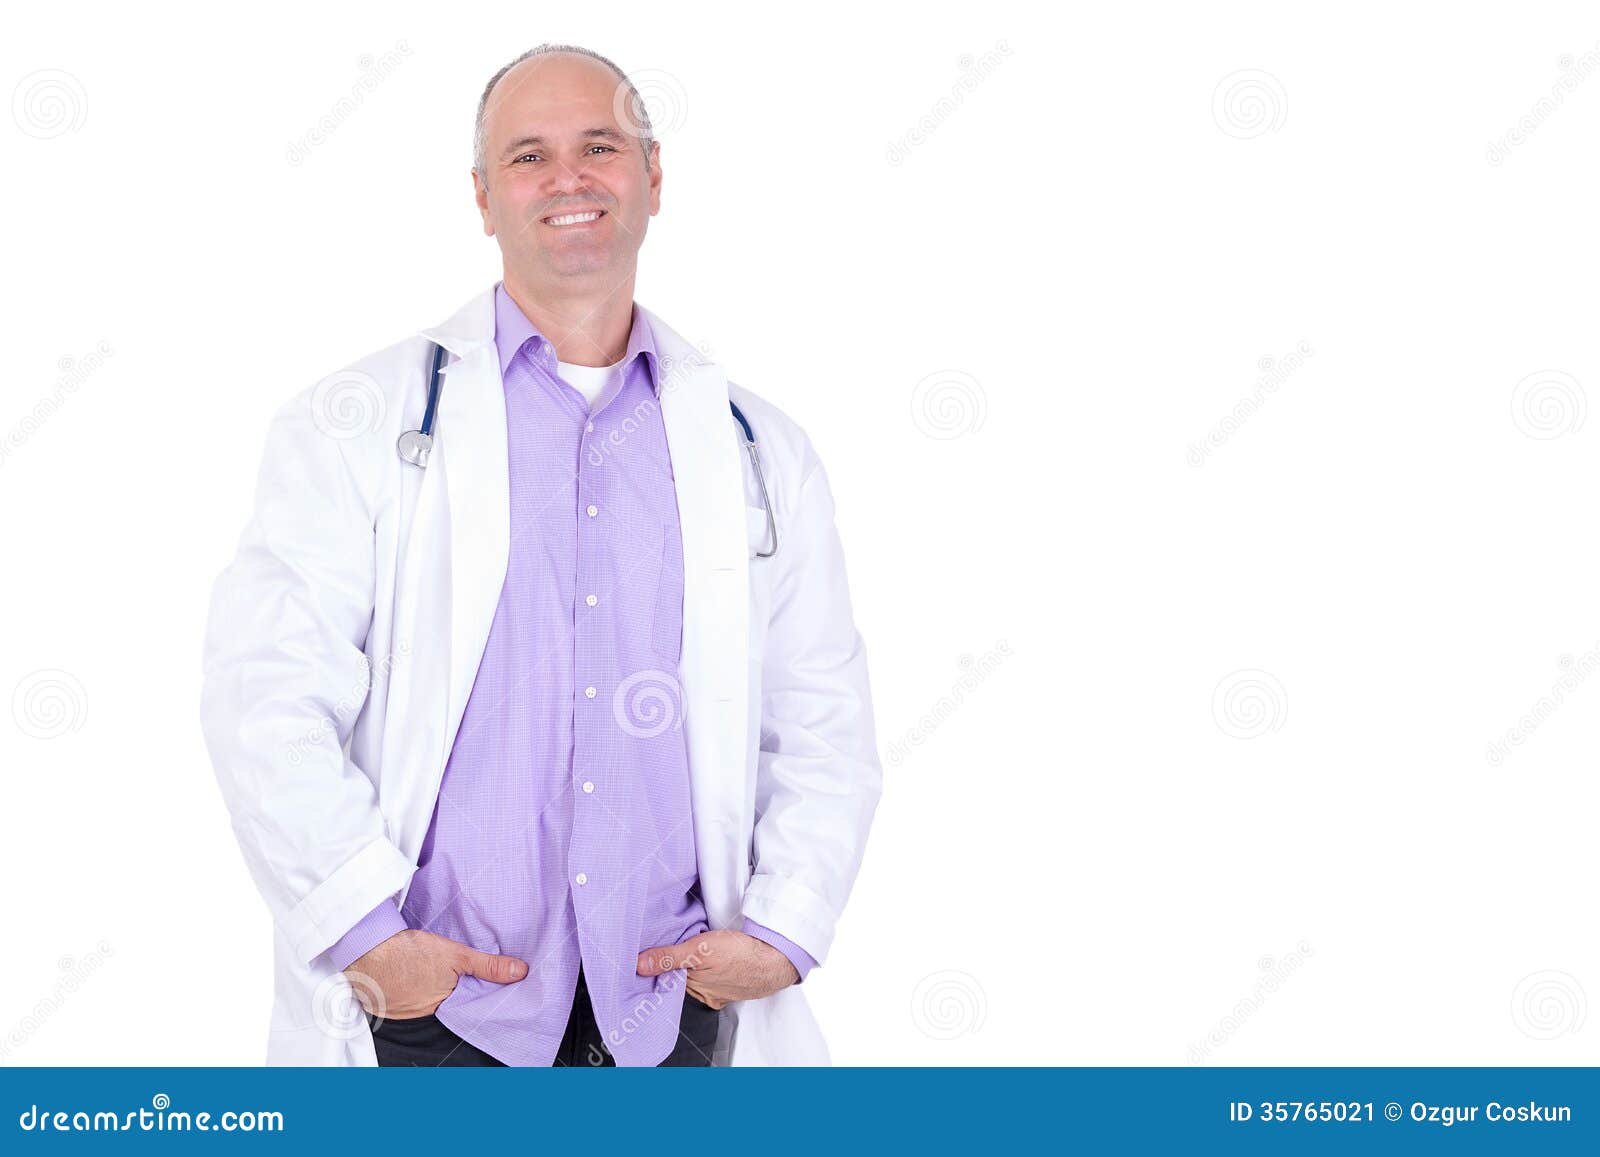 middle aged practitioner doctor looking at you relaxed